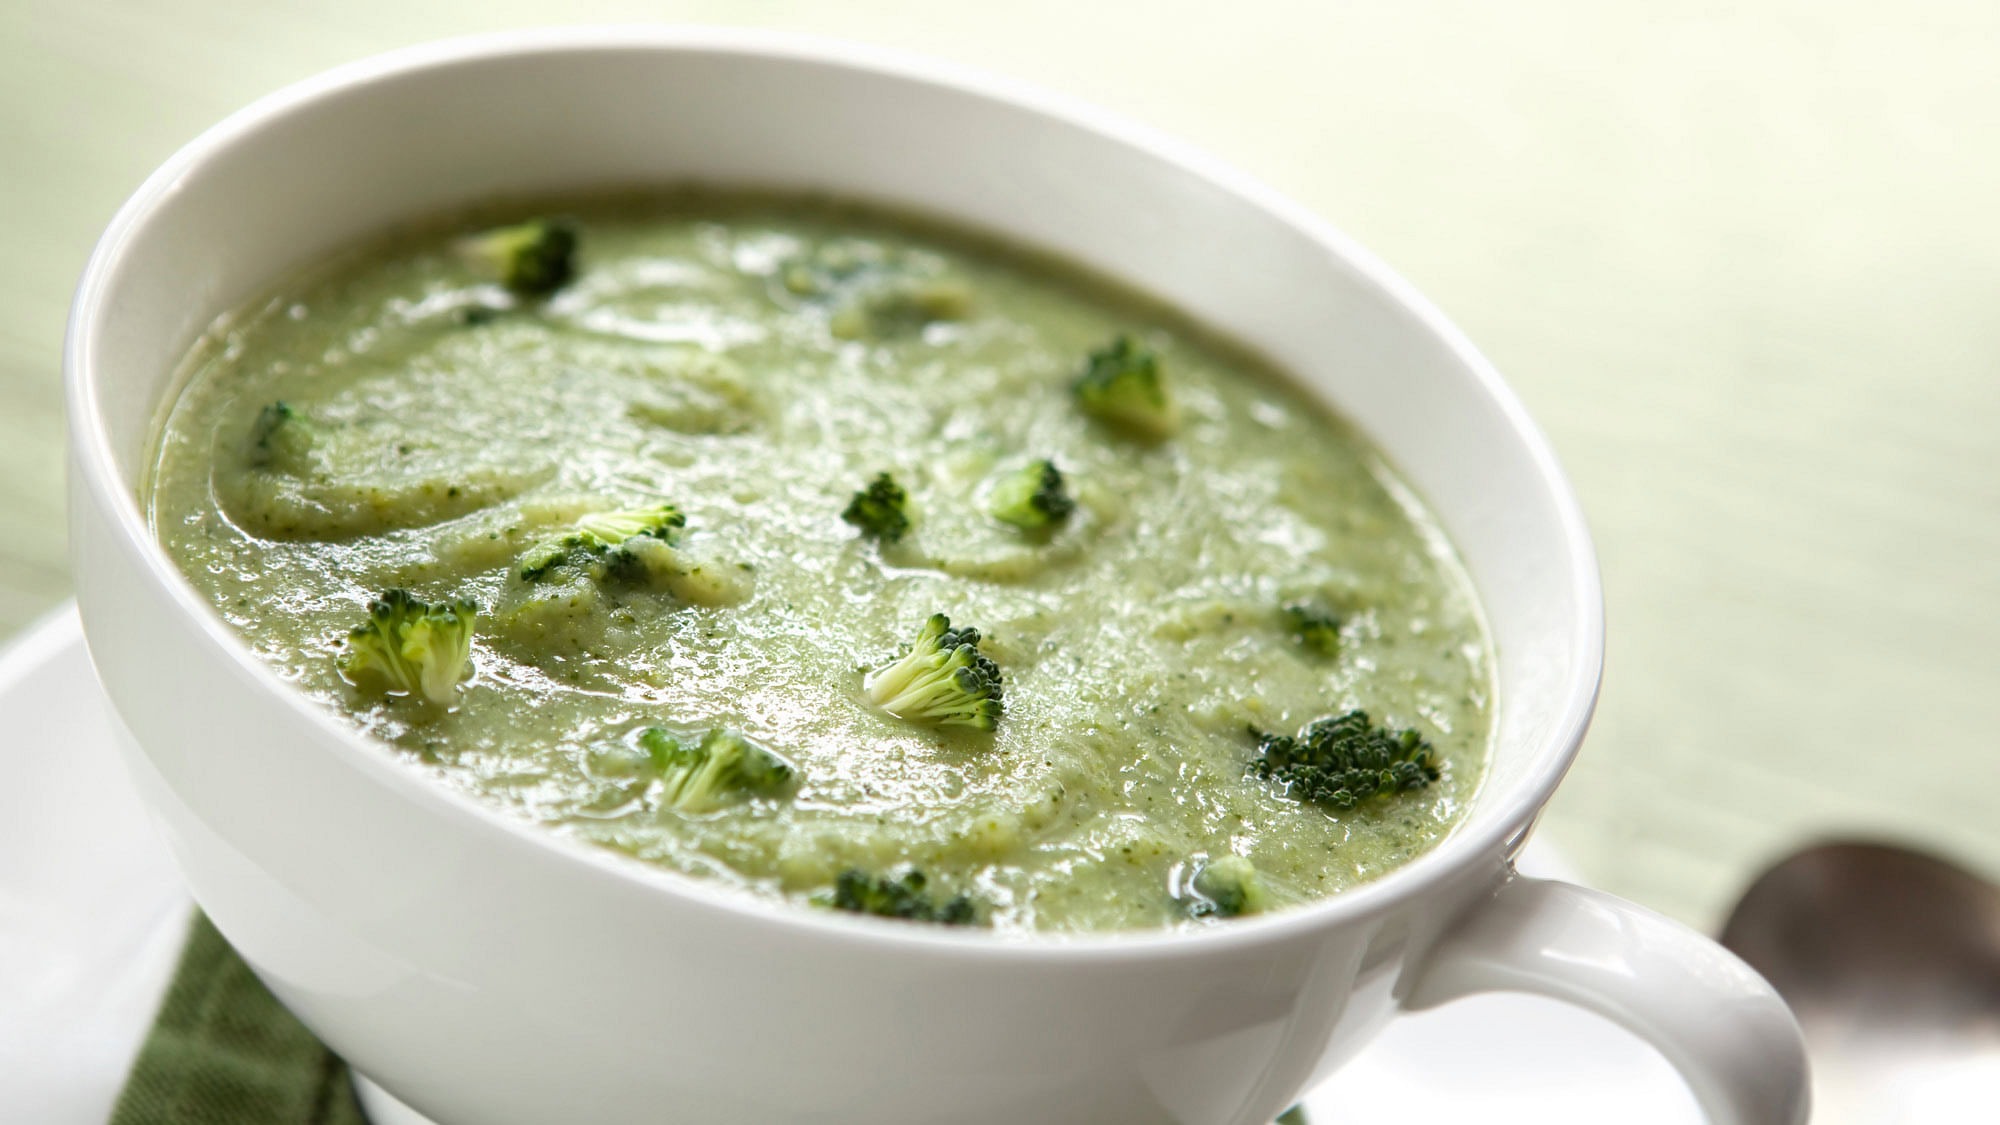 On World Vegetarian Day, opt for some hot broccoli broth. (Photo: iStockphoto)